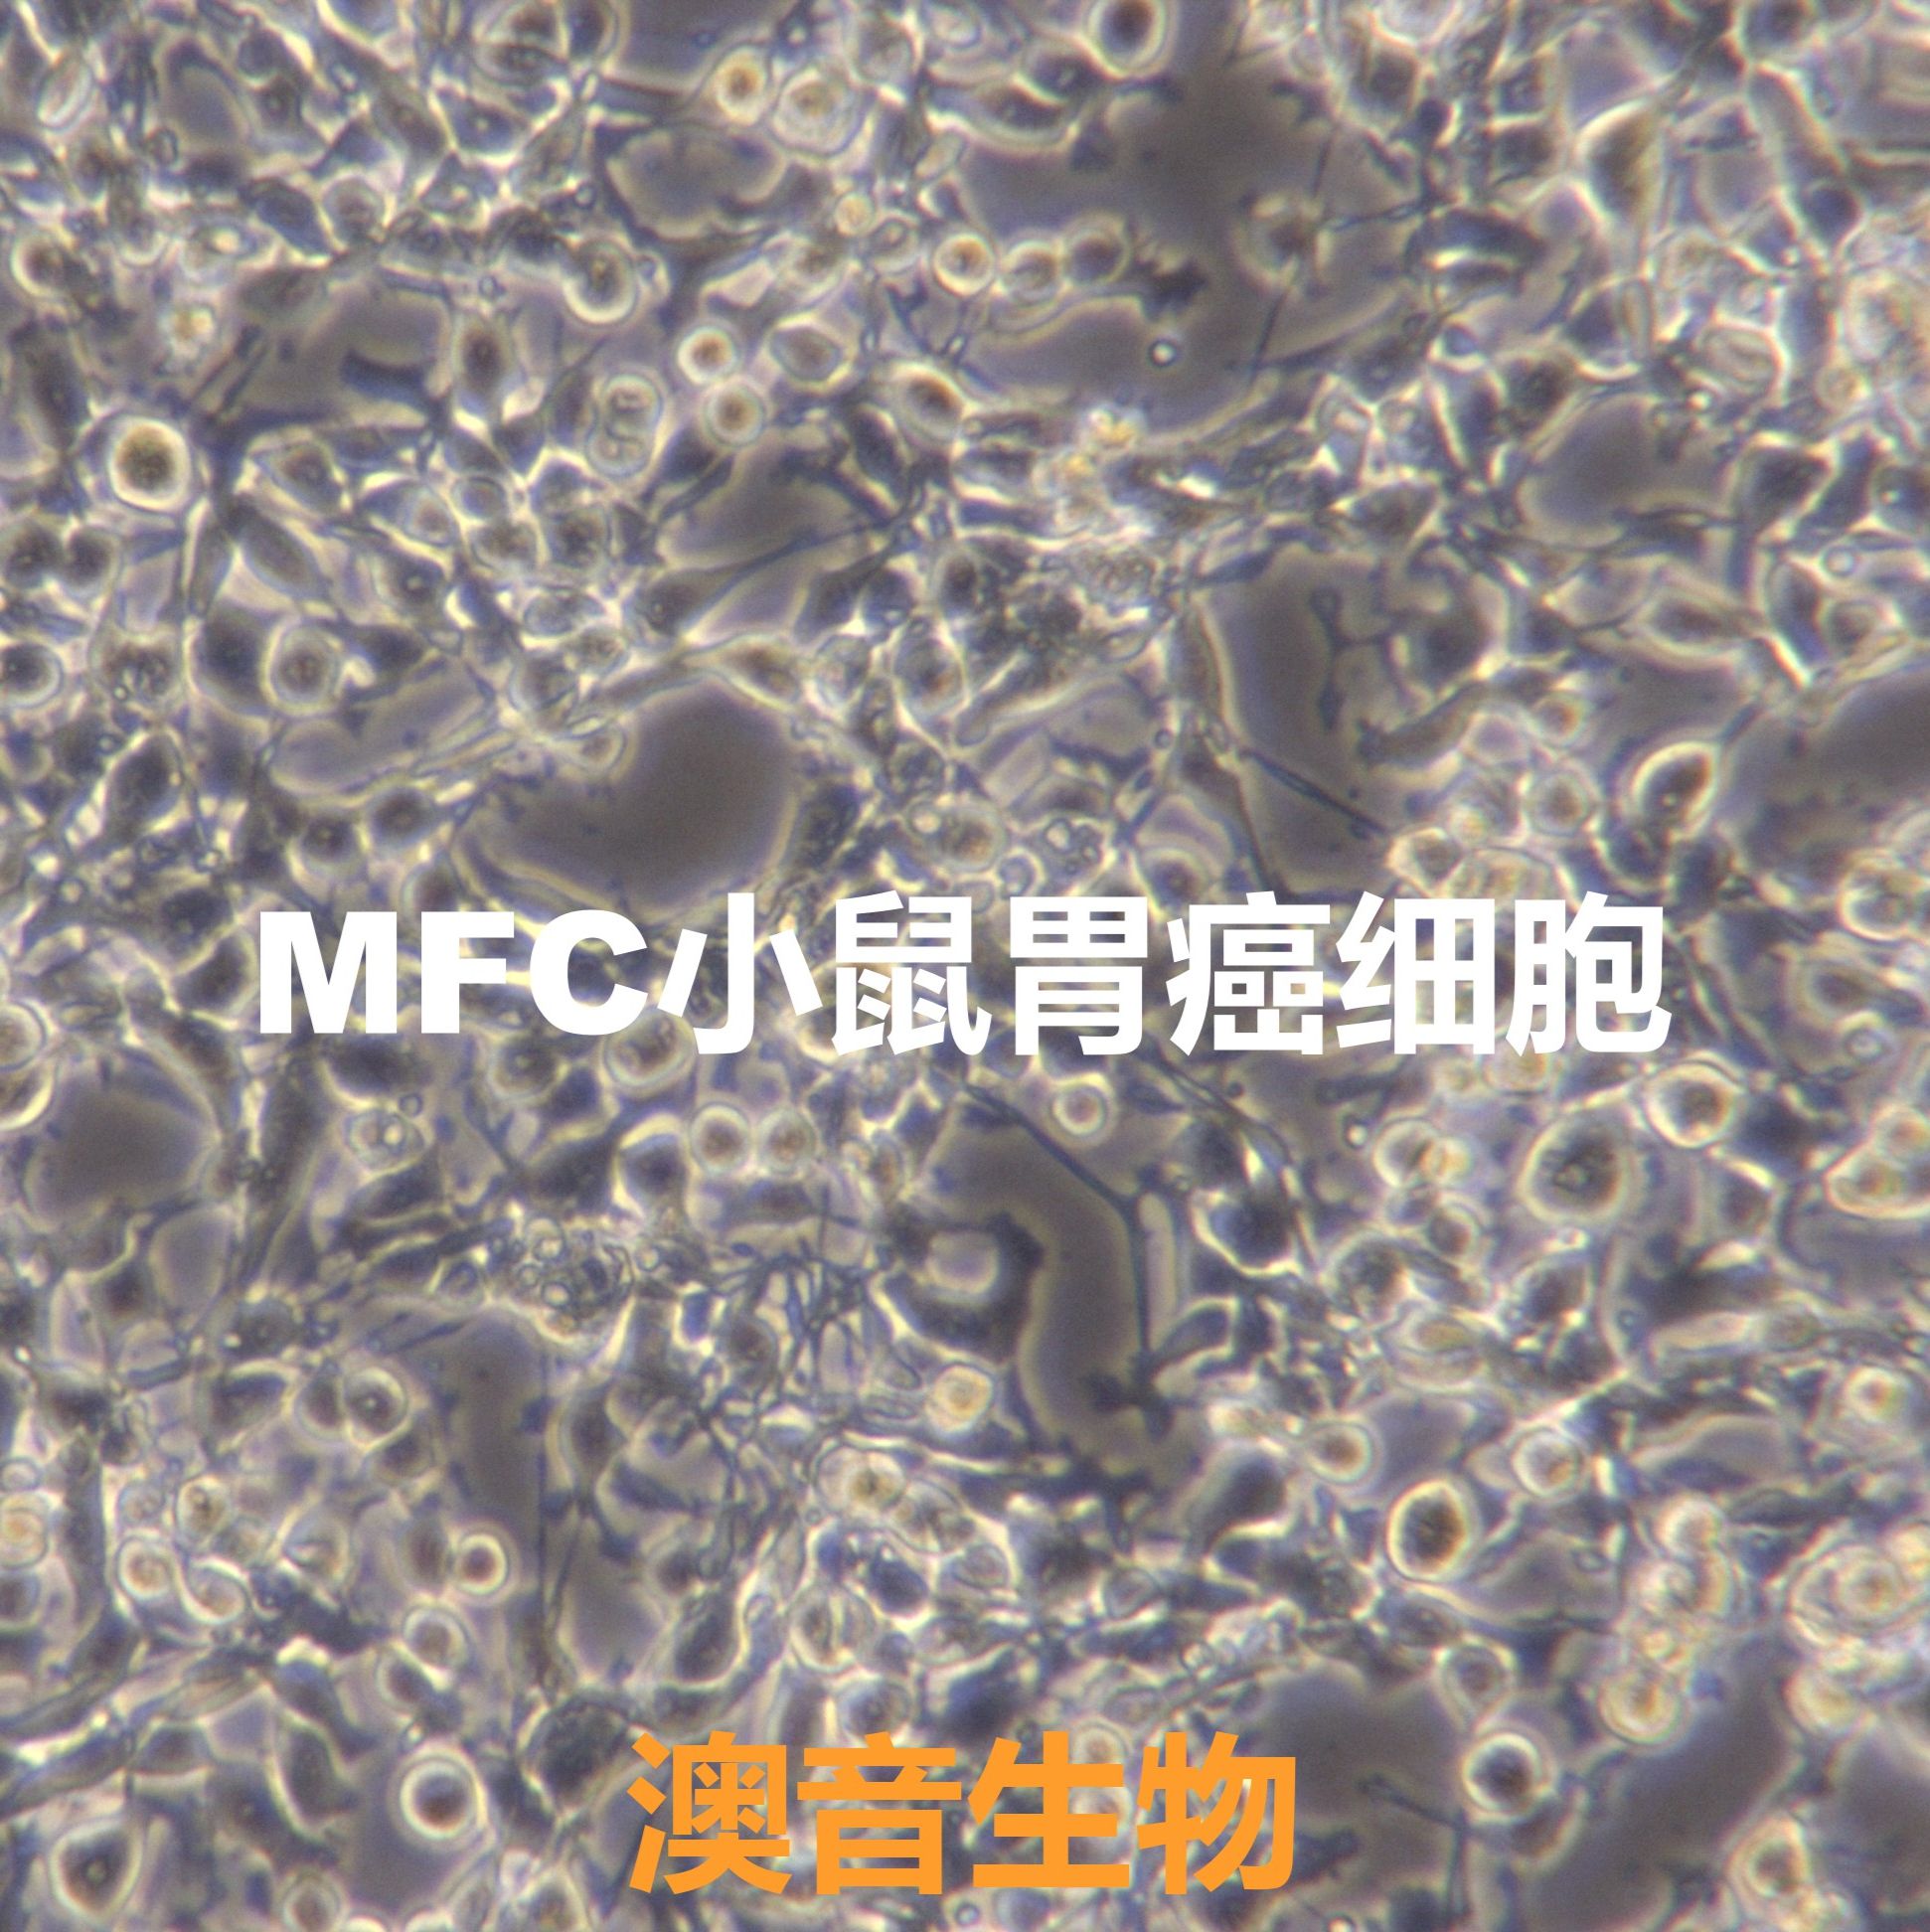 MFC【MFC;MFC;Mouse Forestomach Carcinoma】小鼠胃癌细胞